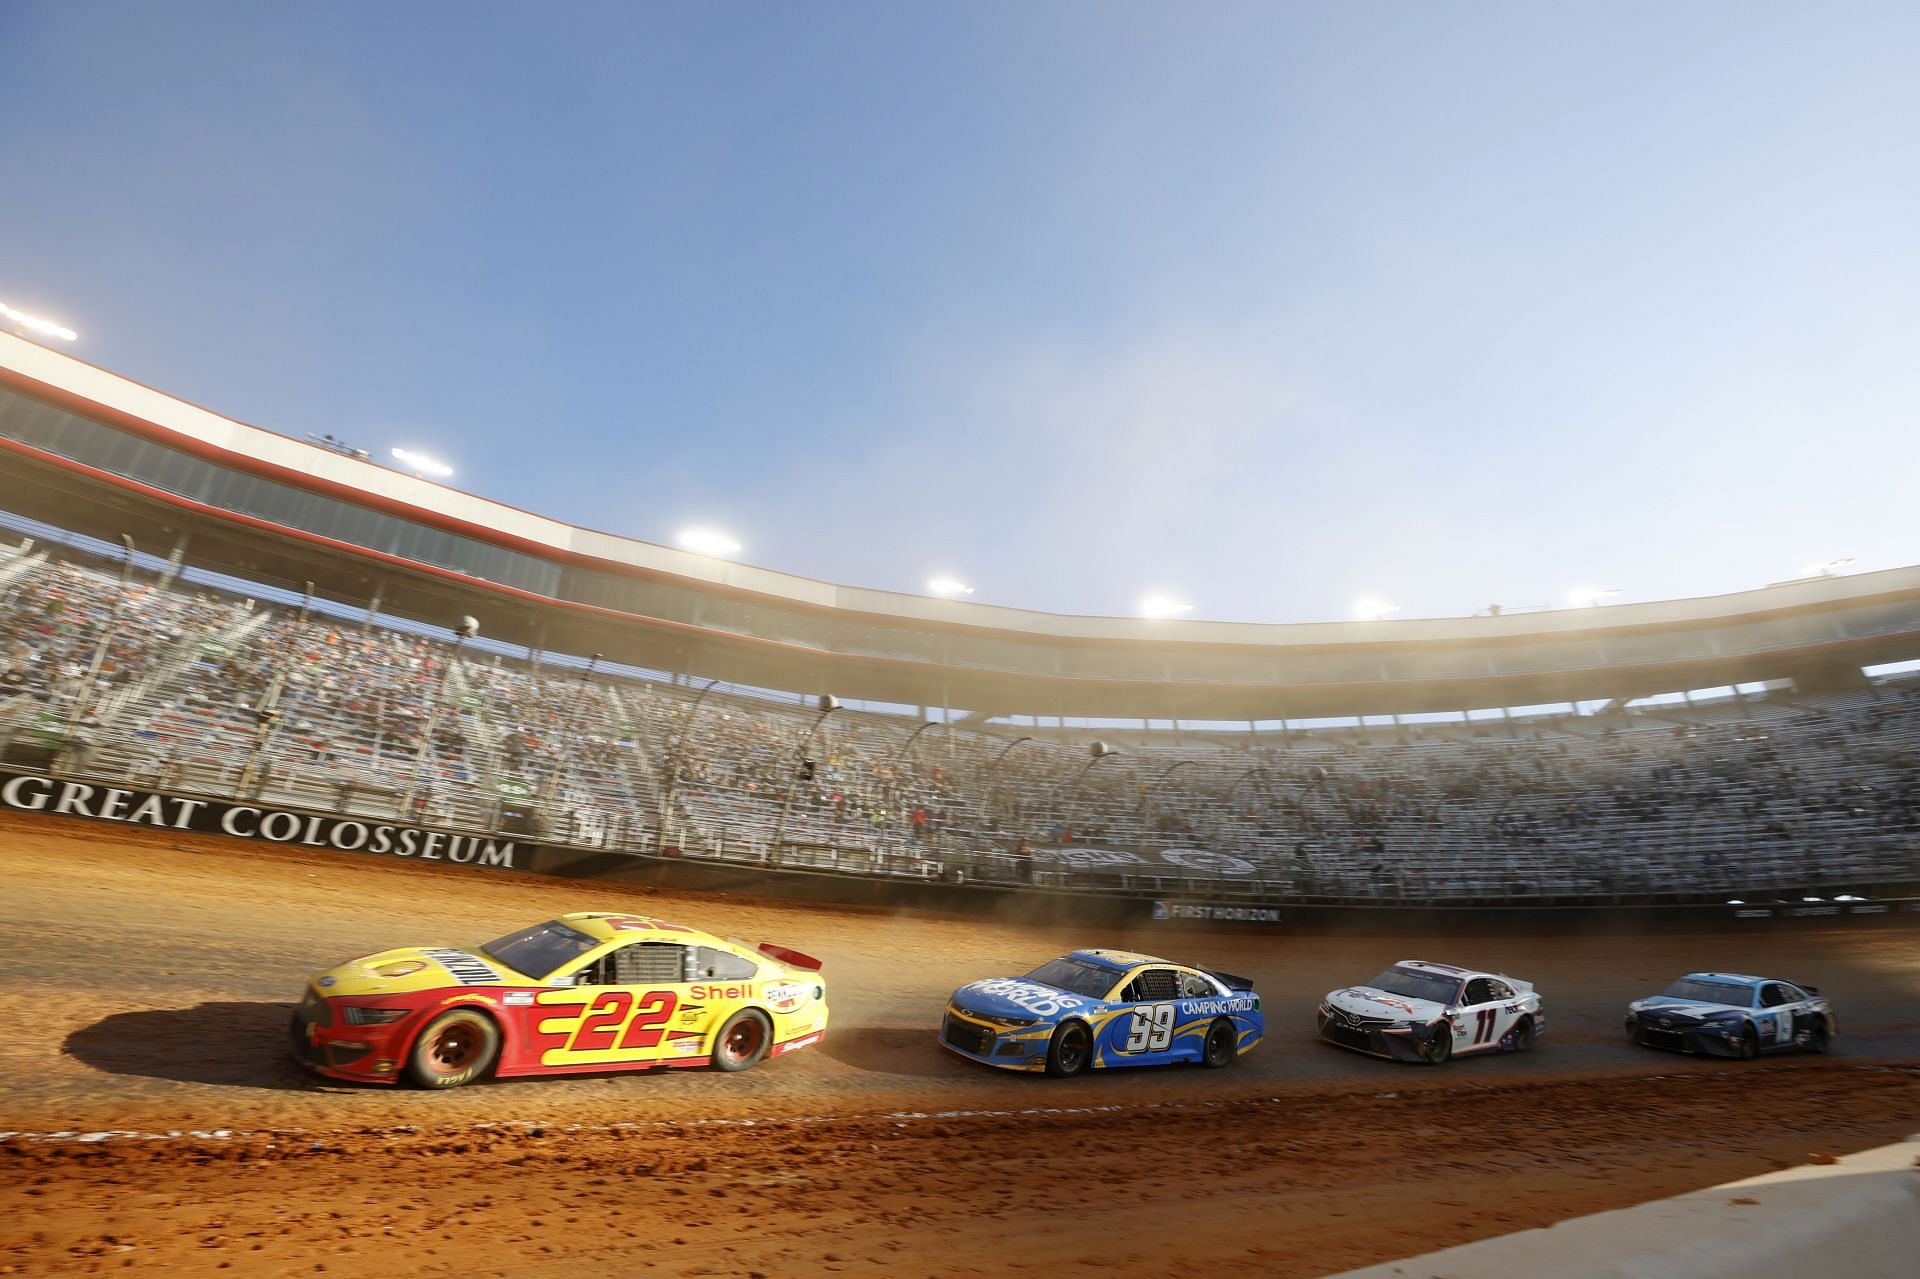 Joey Logano leads a pack of cars during the 2021 NASCAR Cup Series Food City Dirt Race at Bristol Motor Speedway in Tennessee (Photo by Chris Graythen/Getty Images)